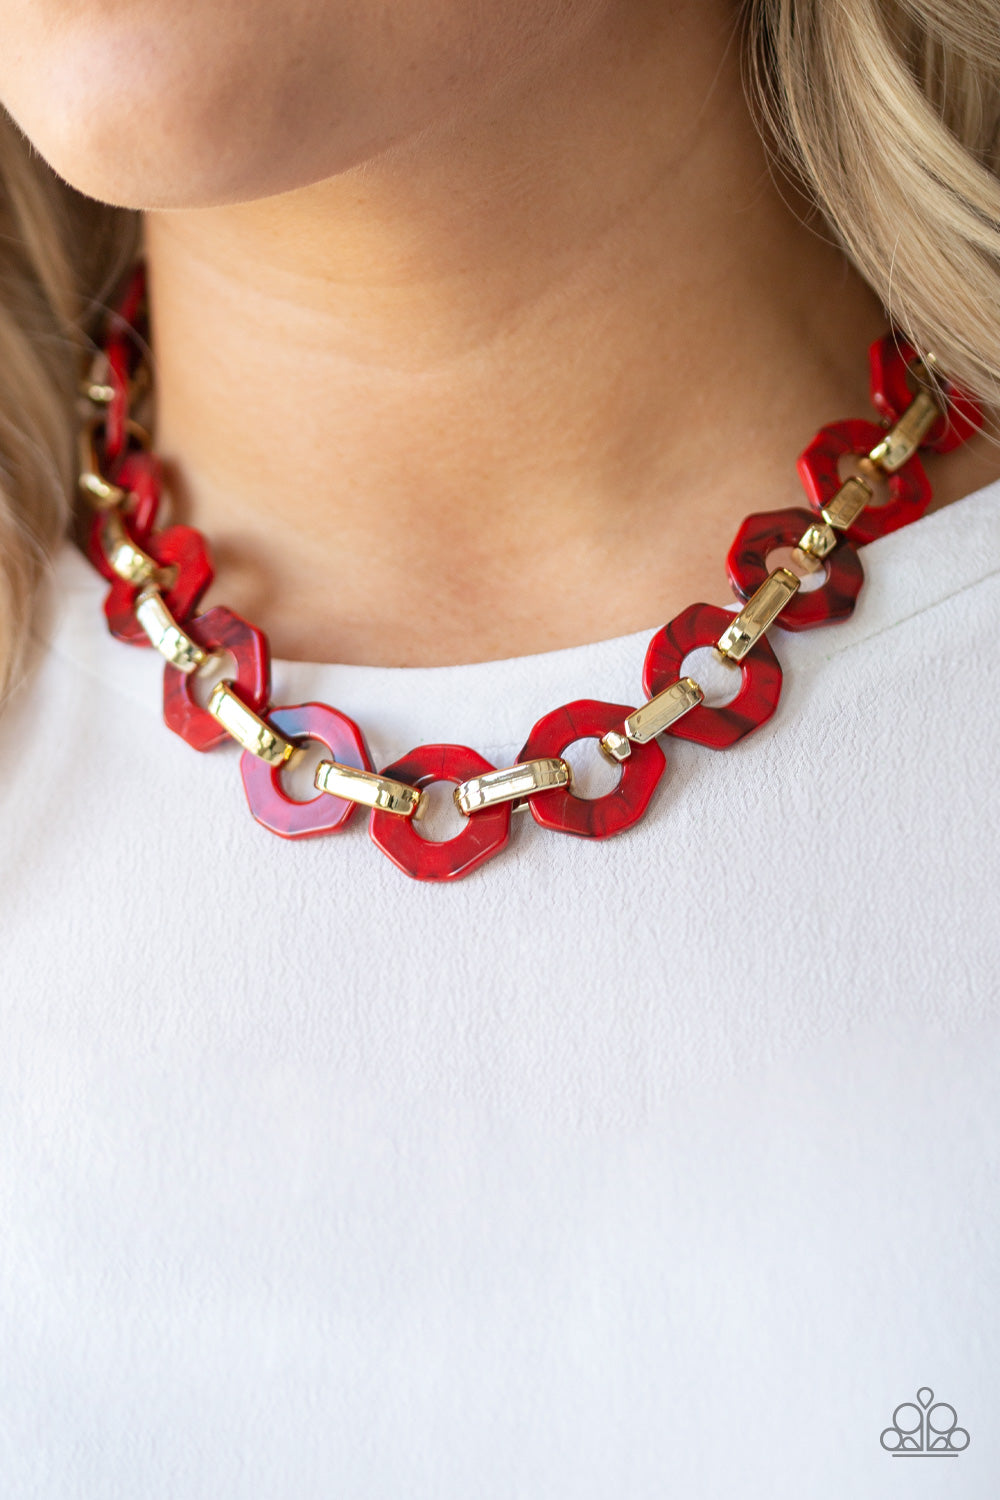 Fashionista Fever - Red Necklace - TheMasterCollection